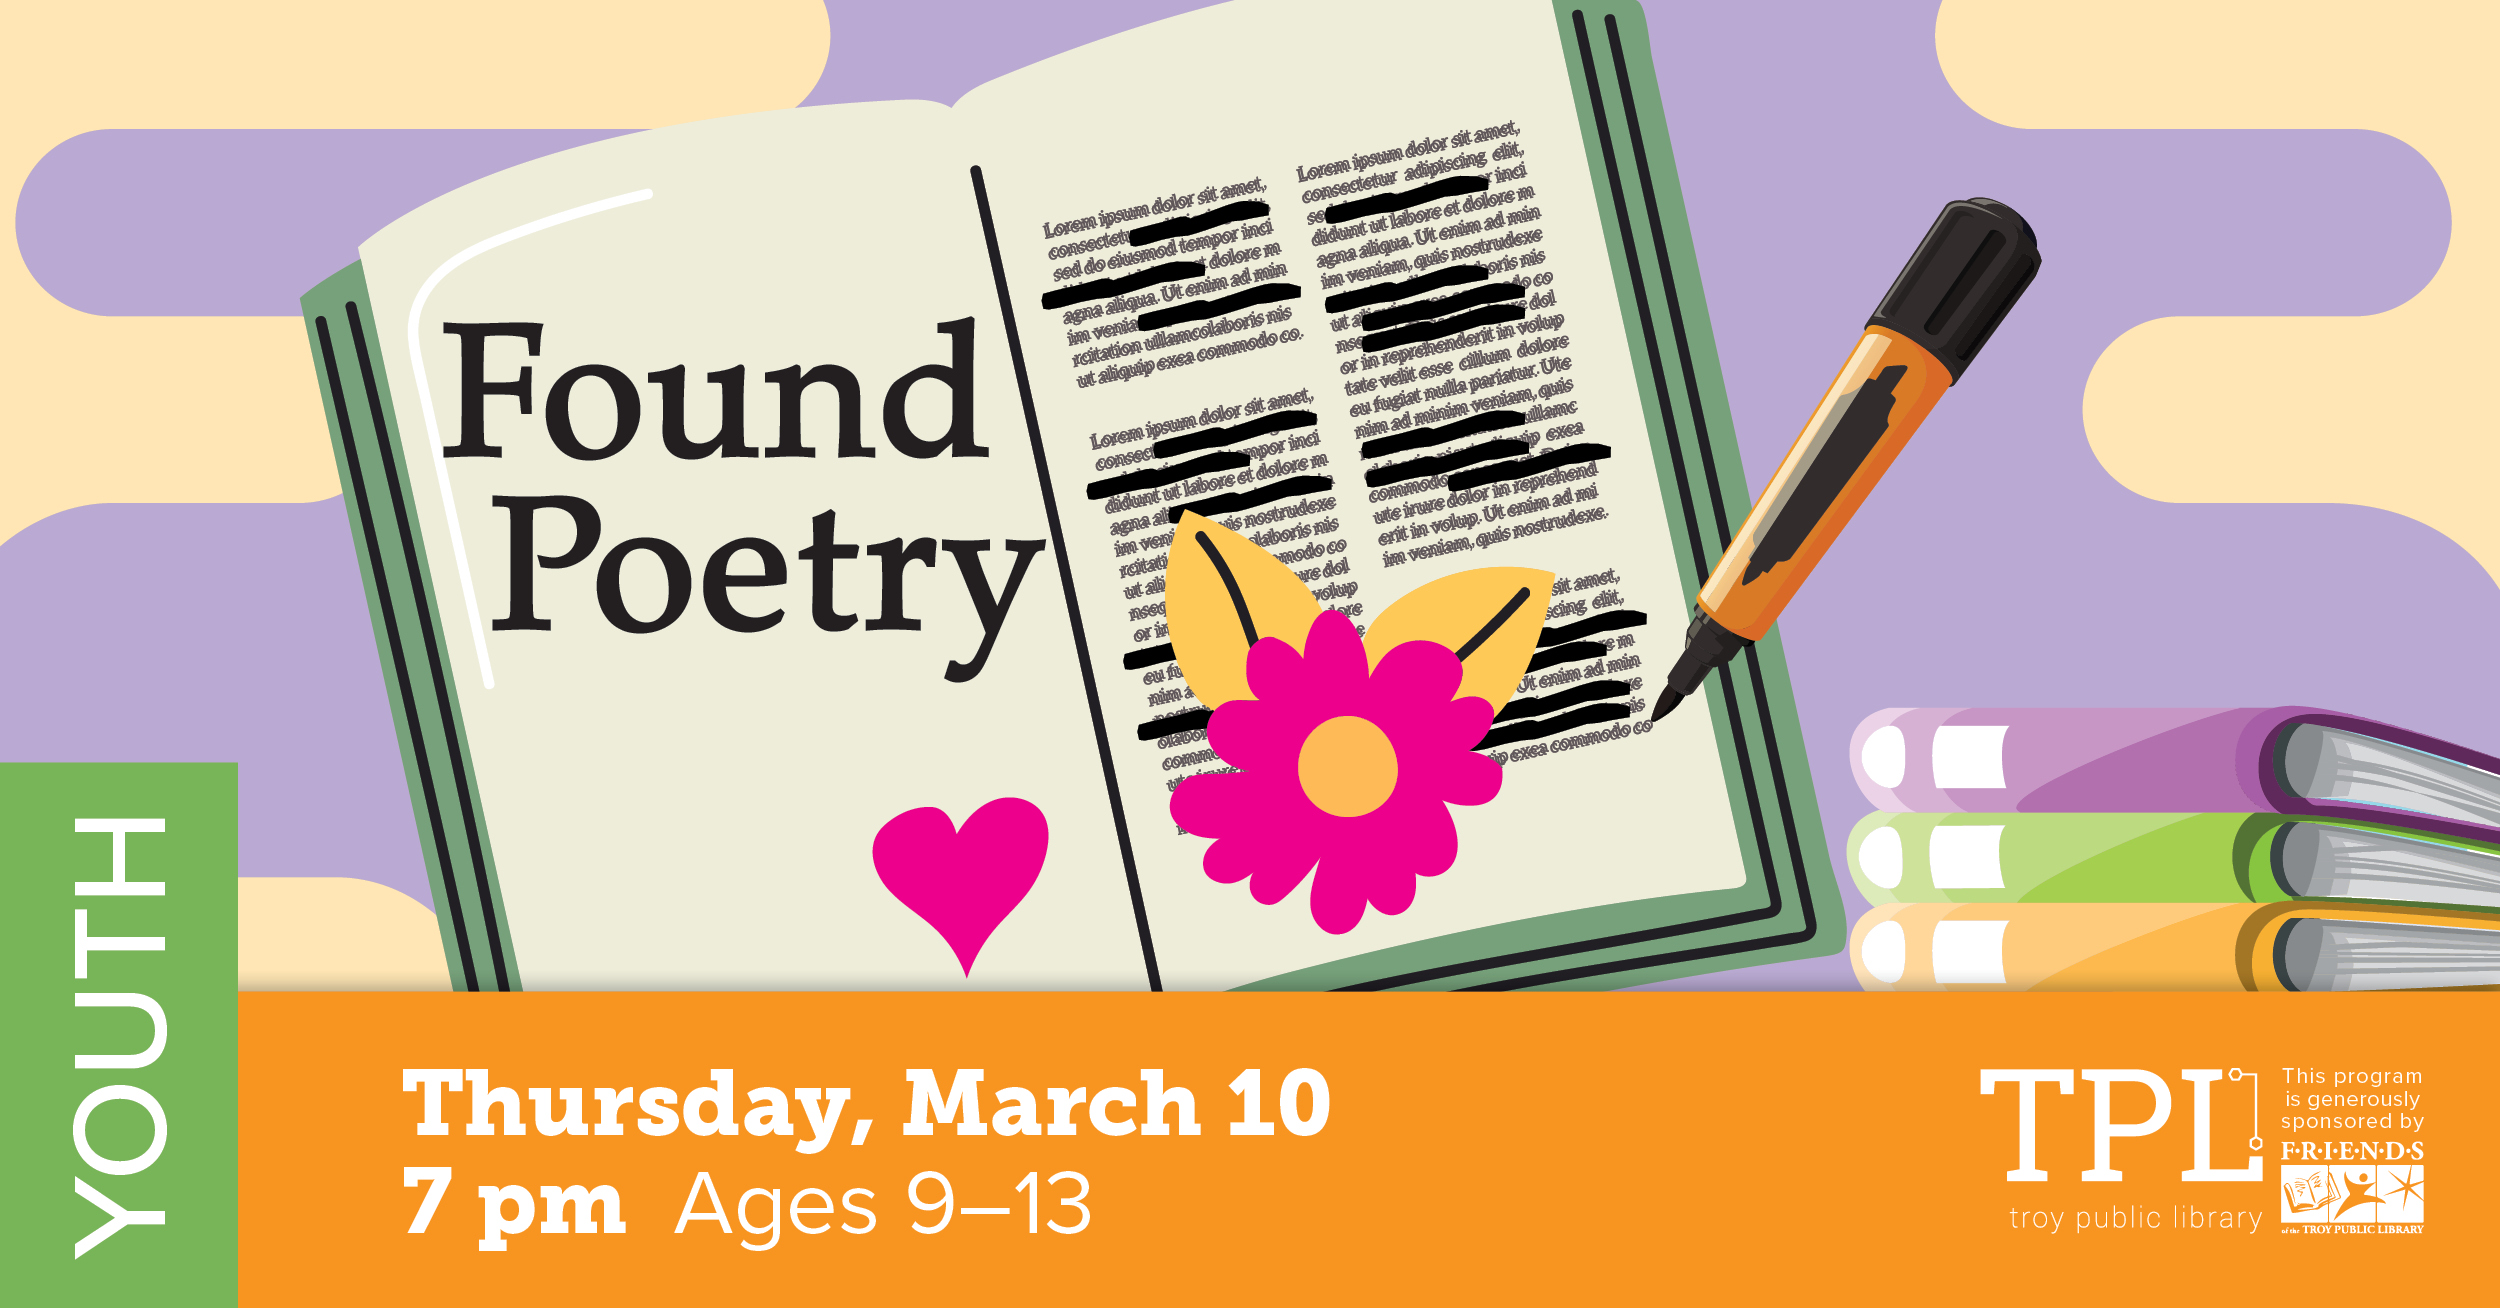 Found Poetry Thursday, March 10 at 7pm Ages 9-13. Sponsored by the Friends of the Troy Public Library